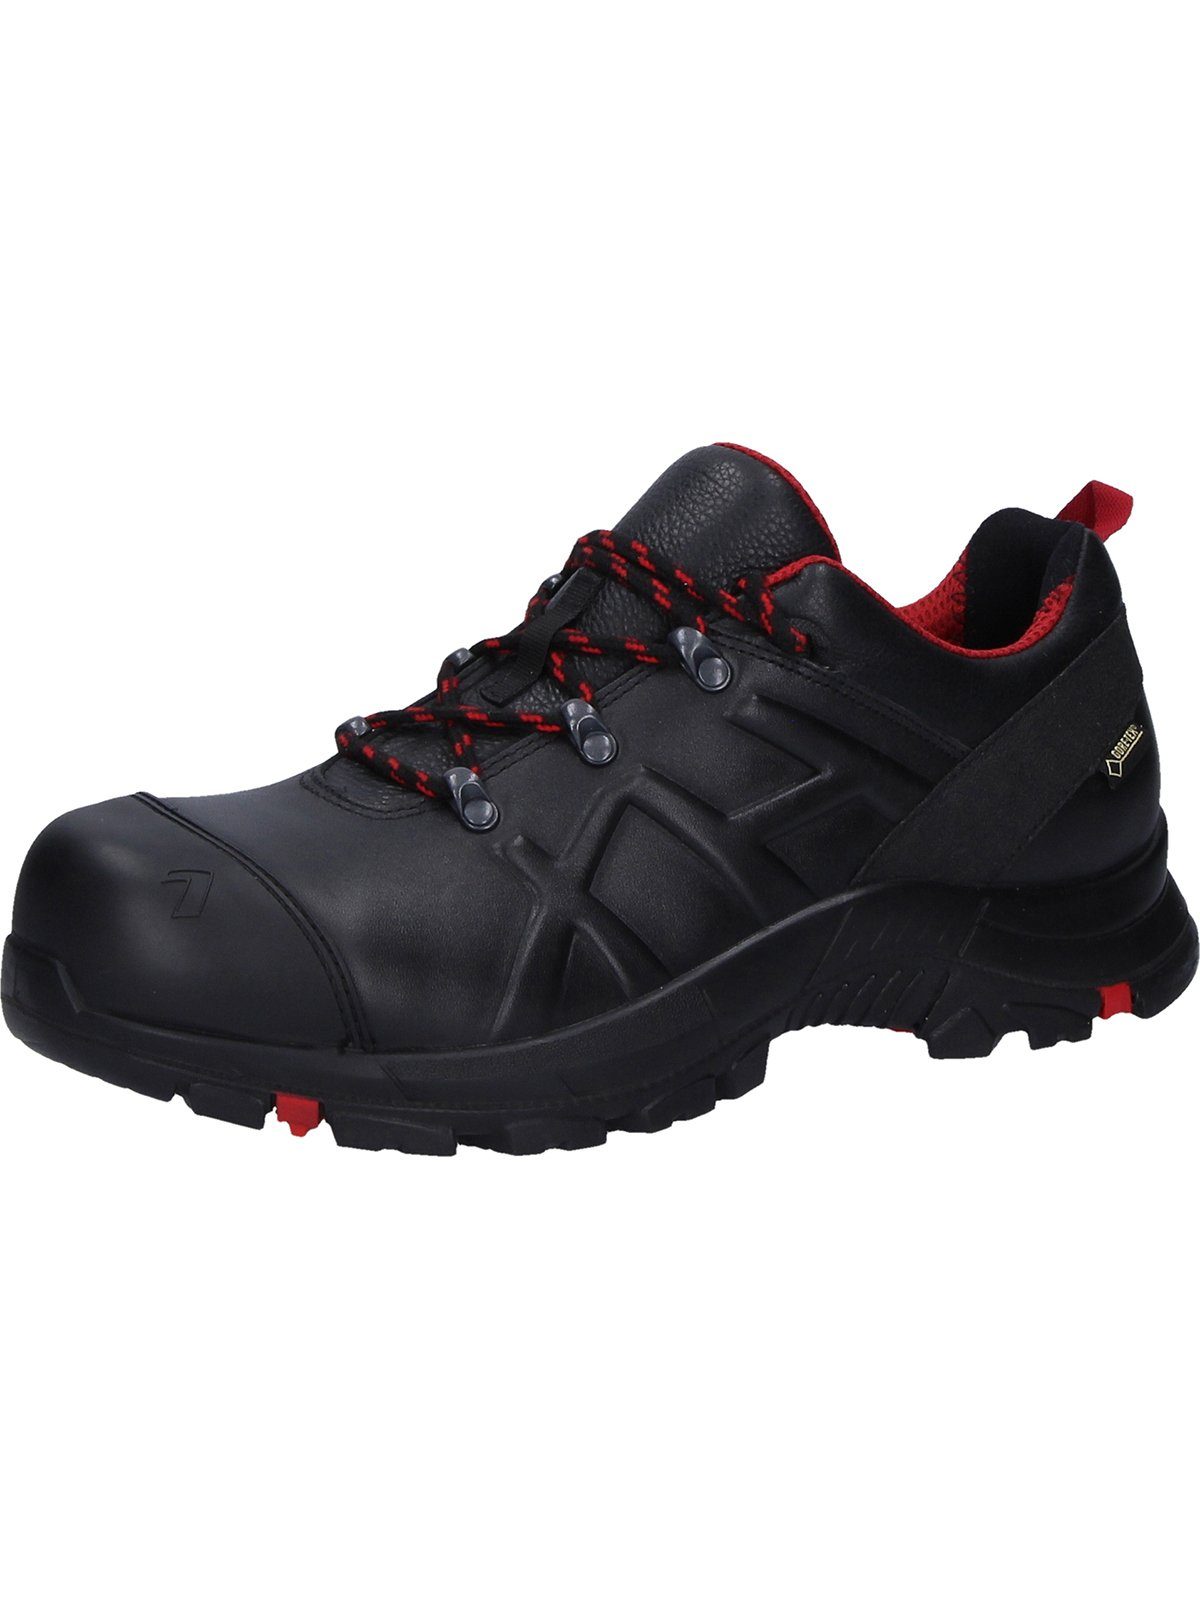 haix Black Eagle Safety 54 Arbeitsschuh black/red low